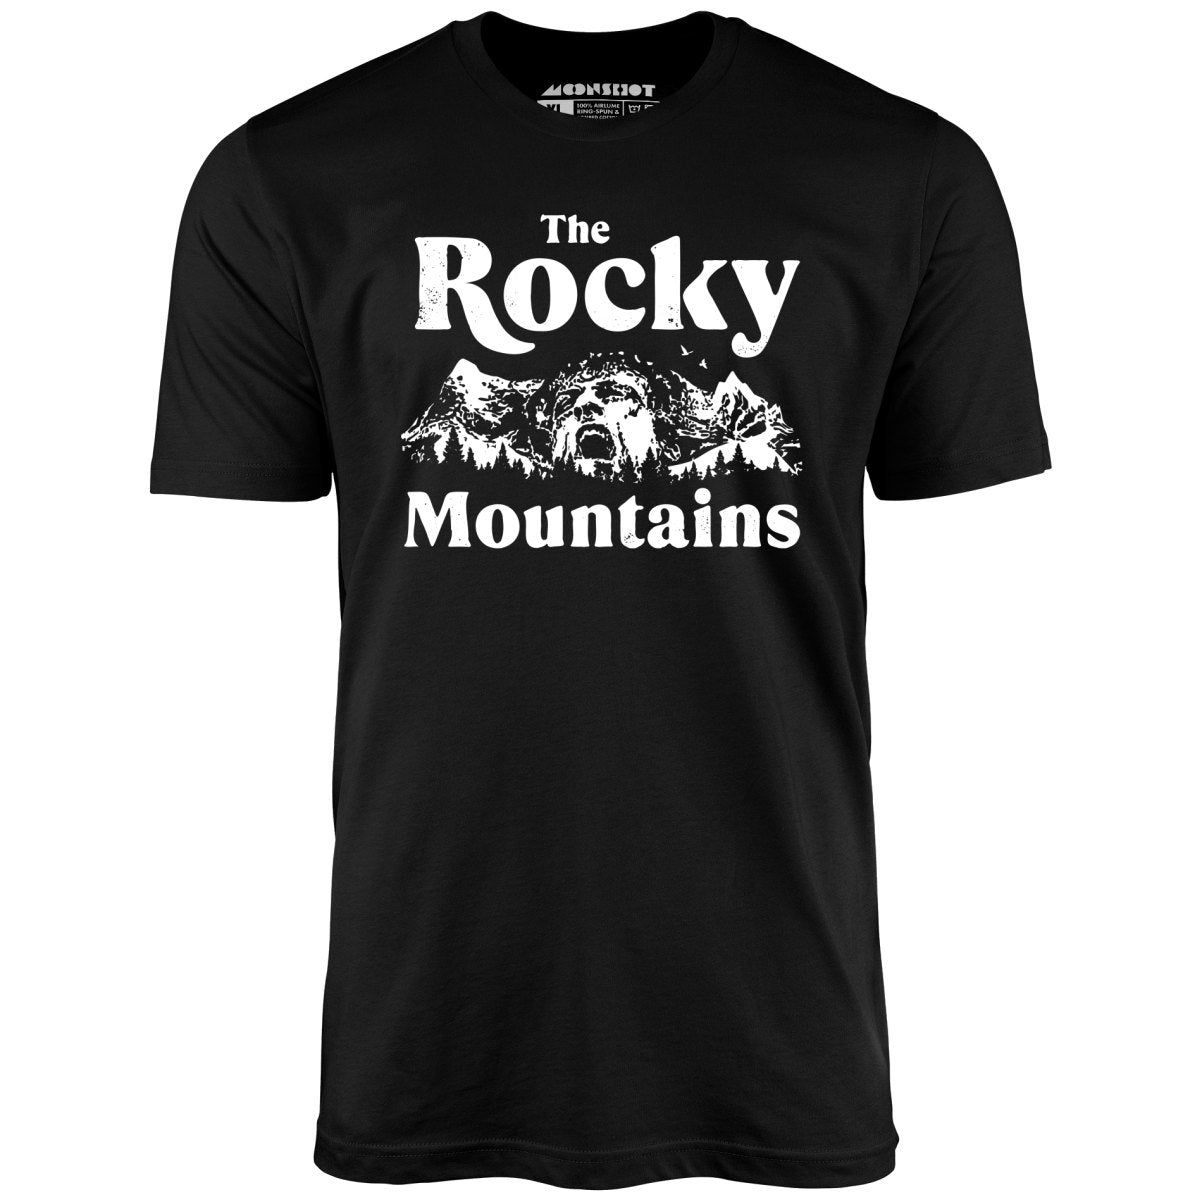 The Rocky Mountains - Unisex T-Shirt